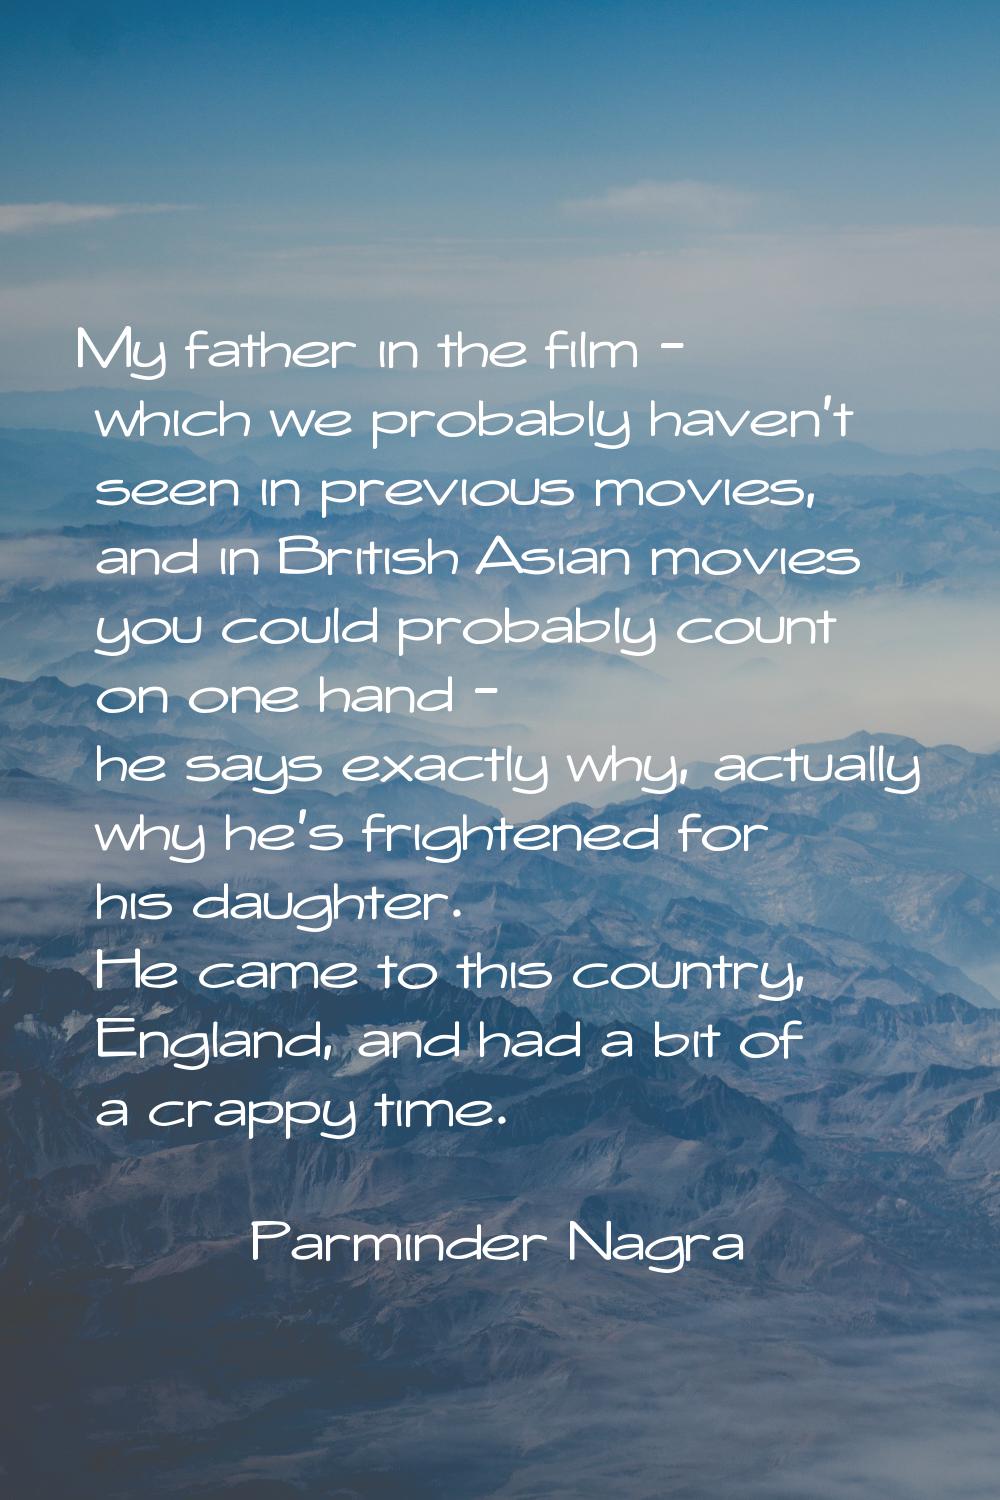 My father in the film - which we probably haven't seen in previous movies, and in British Asian mov